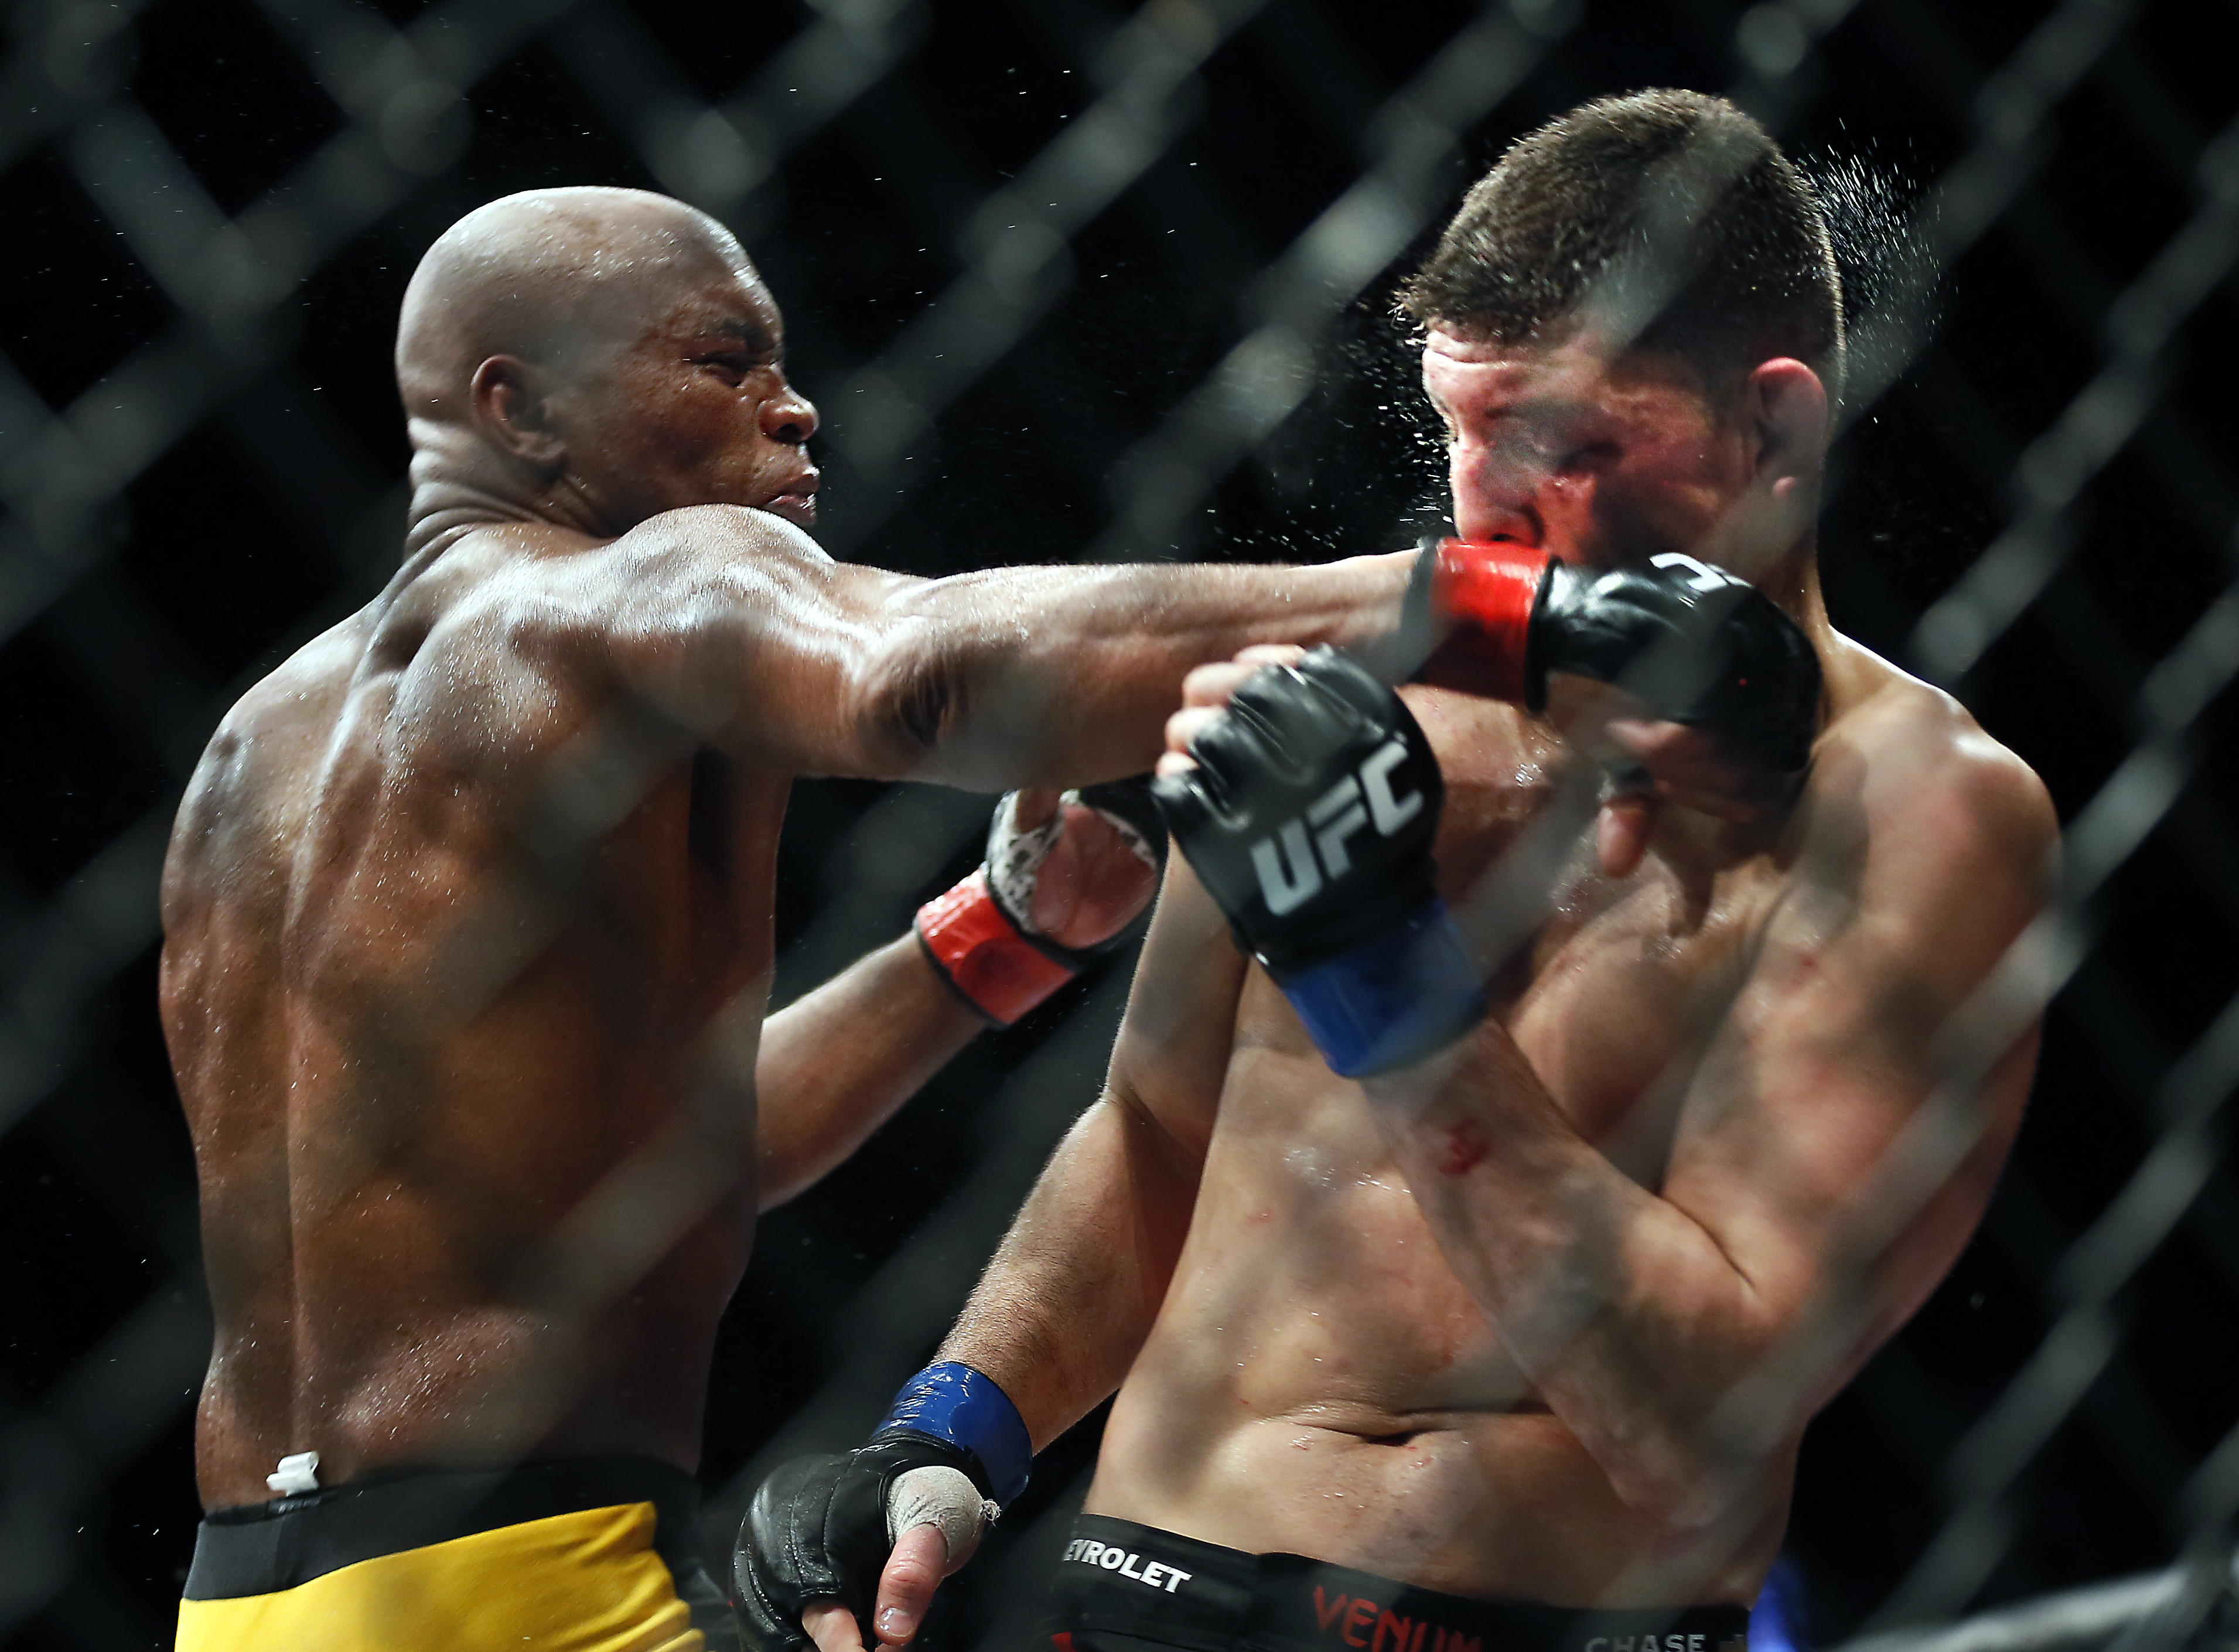 Middleweight Anderson Silva punches Nick Diaz during their fight at the MGM Grand Garden Arena in Las Vegas on Saturday, Jan. 31, 2015